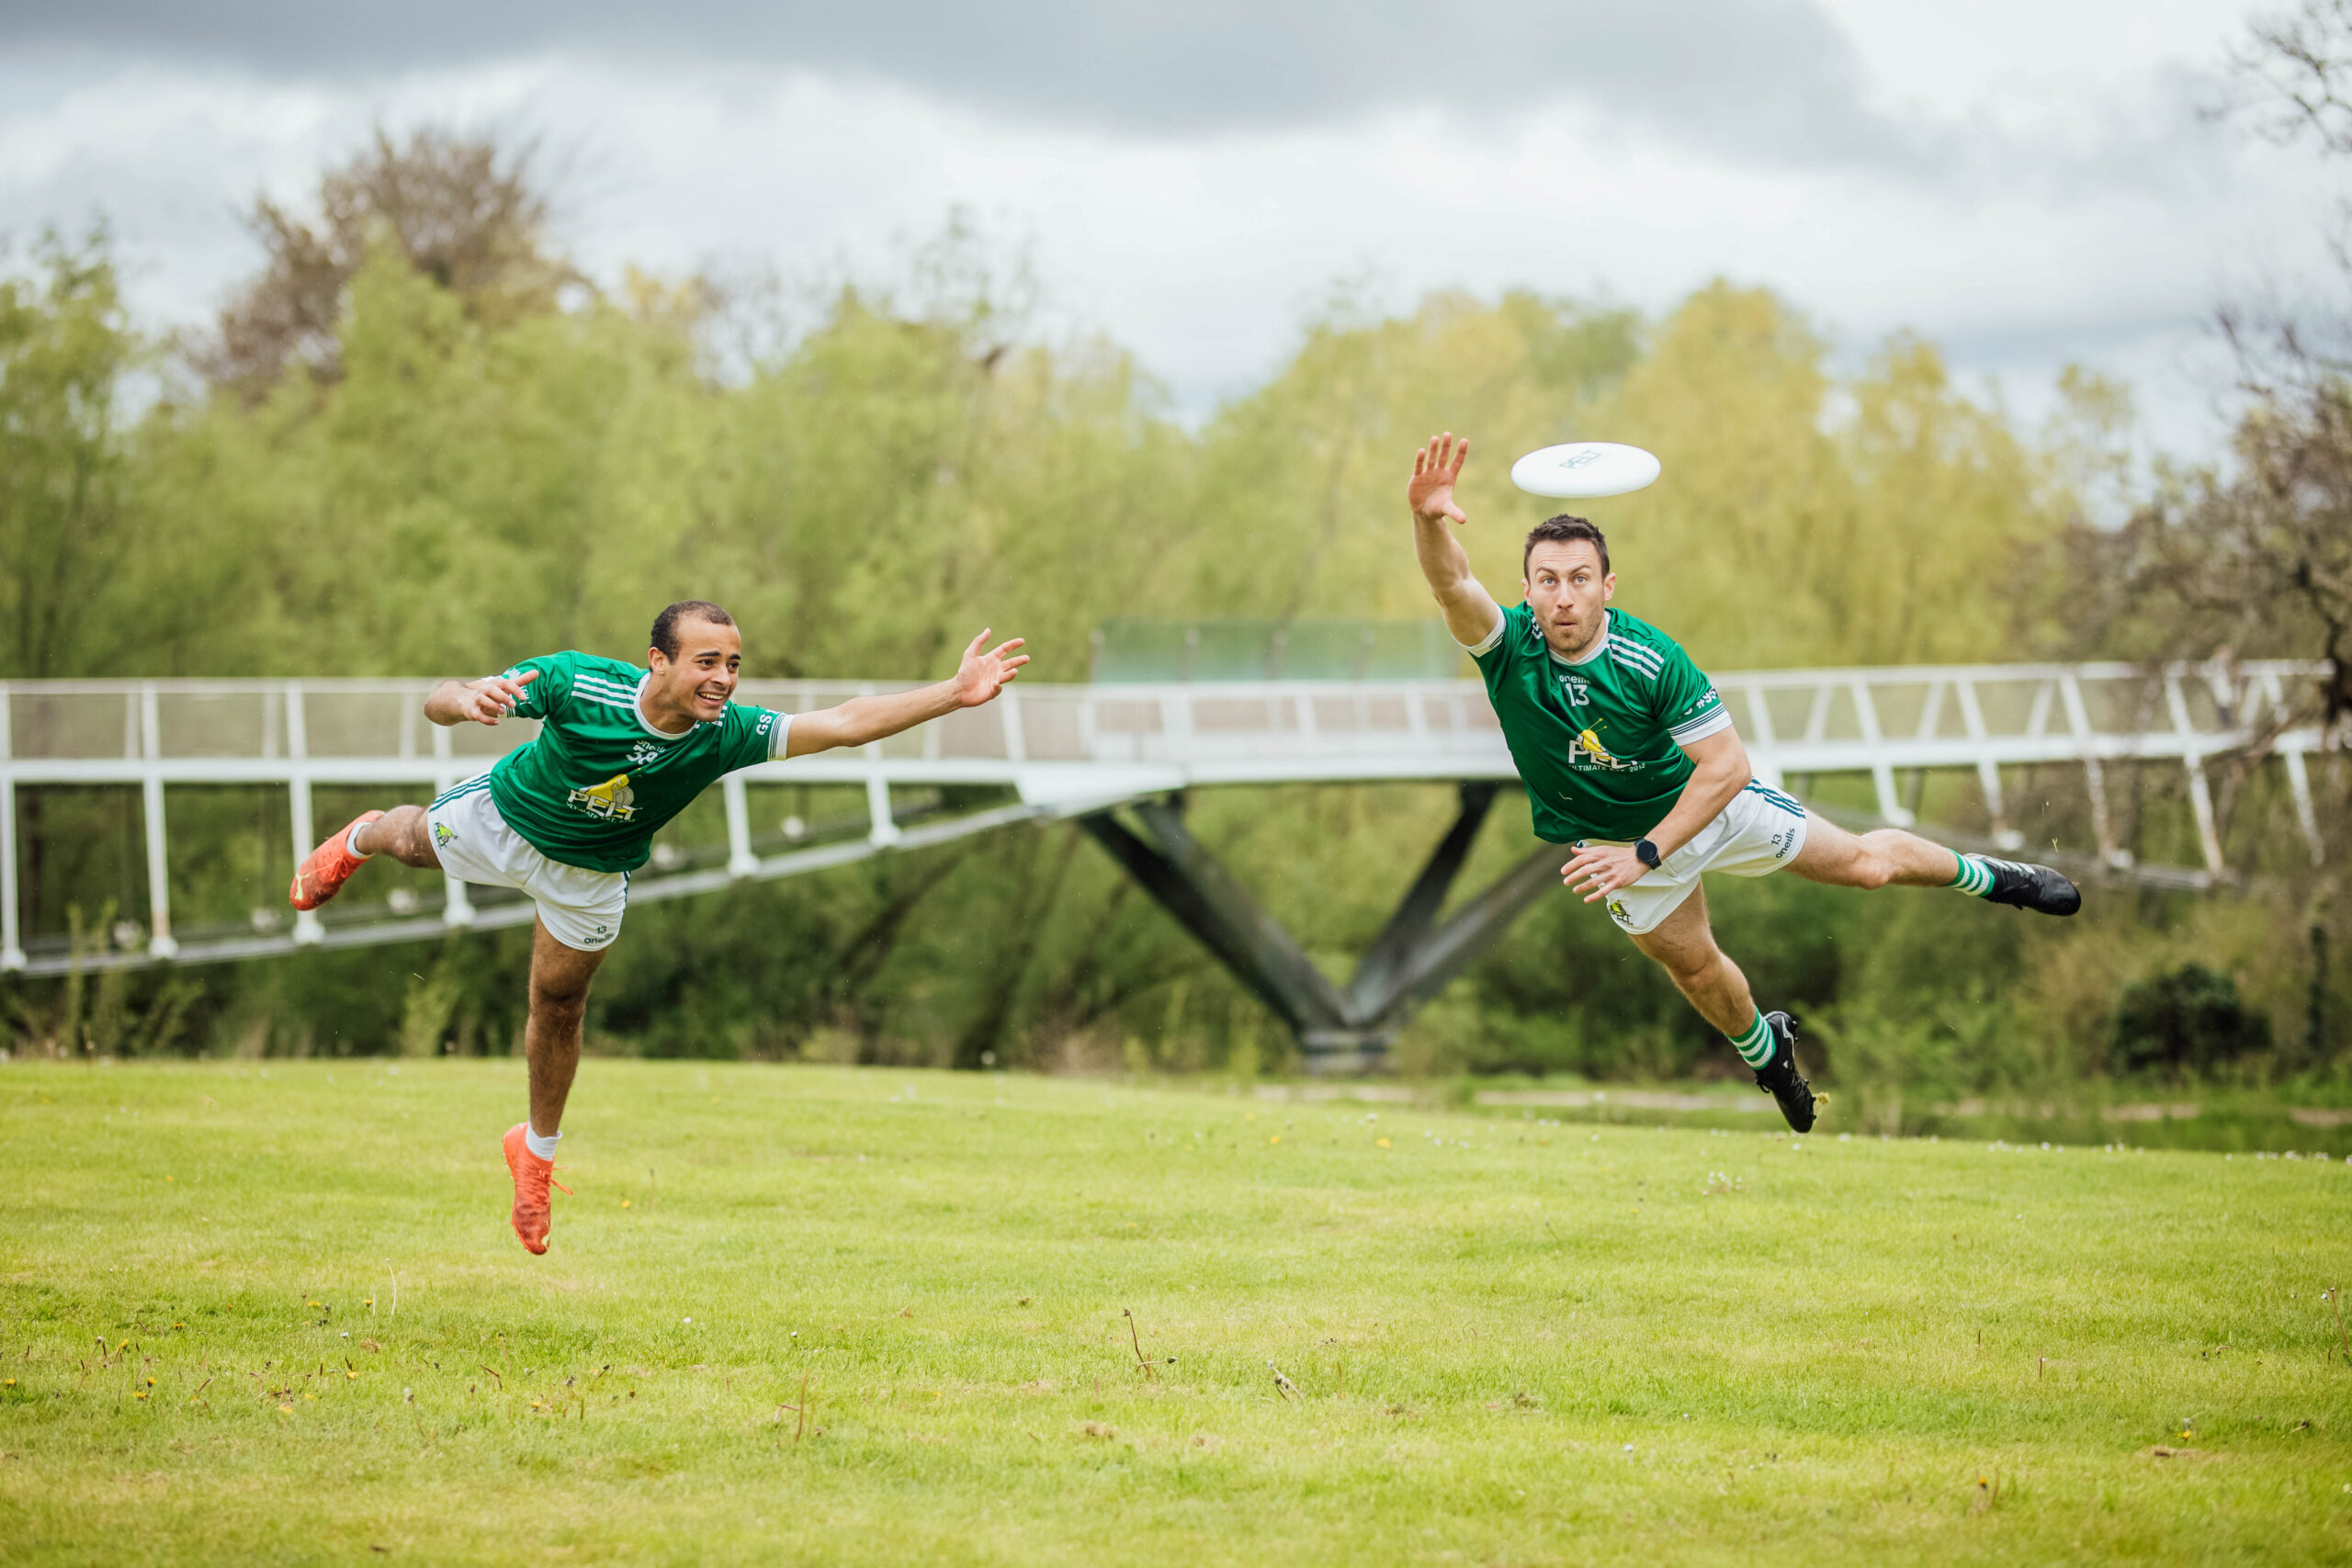 No Repro Fee Cian Hypolite and Christy McAllister pictured as details of the 2023 European Ultimate Frisbee Championships Flying into Limerick were announced today at the Universioty of Limerick. Over 1,300 participants from over 20 European Countries will descend on Limerick for the 2023 European Championships (EUC 2023). The event comes on the back of the successful hosting of the 2022 World Masters Ultimate Frisbee Championships last summer. Pic. Brian Arthur